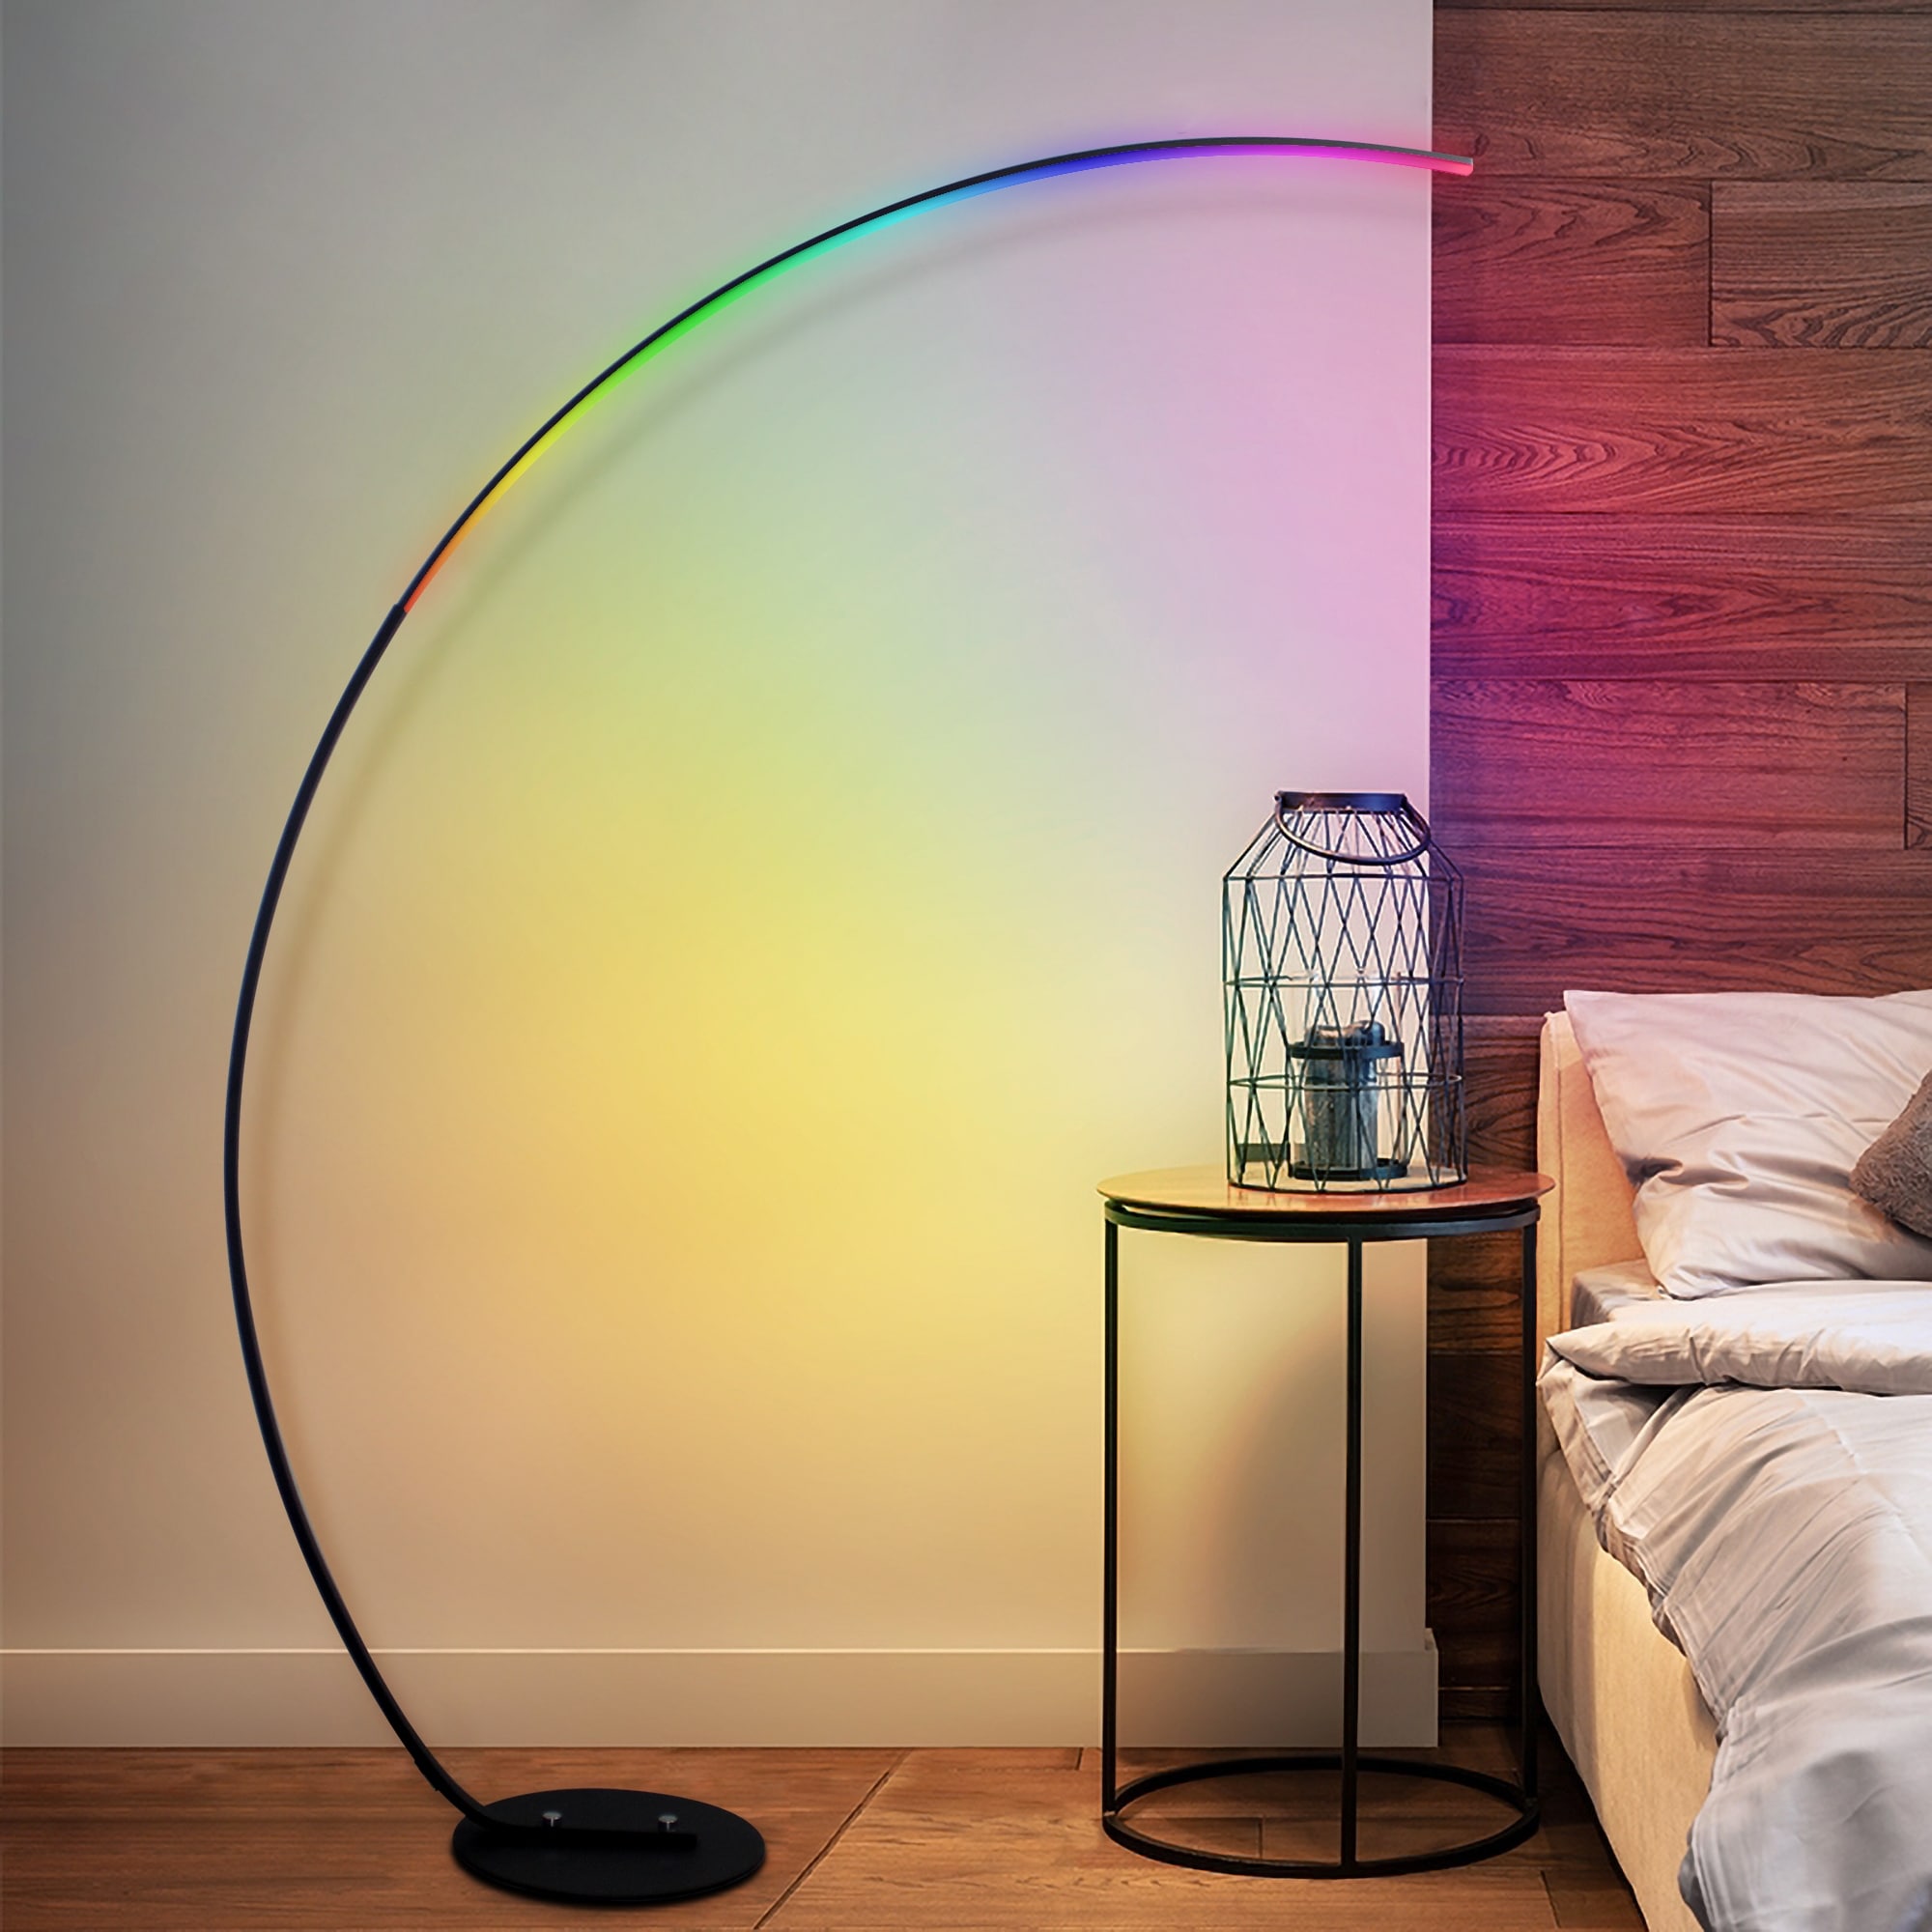 LED RGB Arched Floor Lamp Curved Colorful Lamp 66.9x12.6in Bed Bath   Beyond 34443377